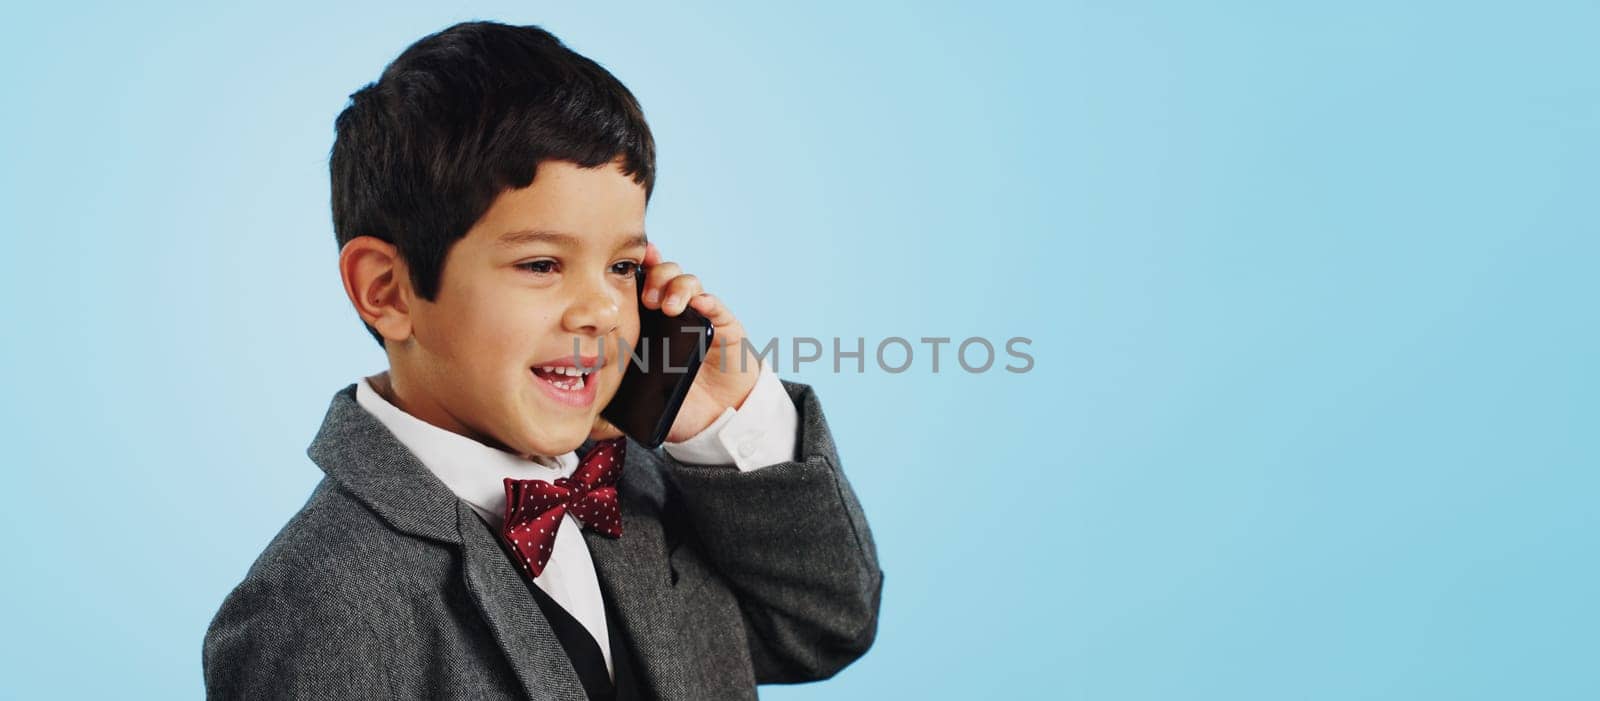 Child, talking and boy with phone call in studio, blue background and mockup with telephone chat or conversation. Calling, kid and speaking with cellphone communication or discussion with mobile.